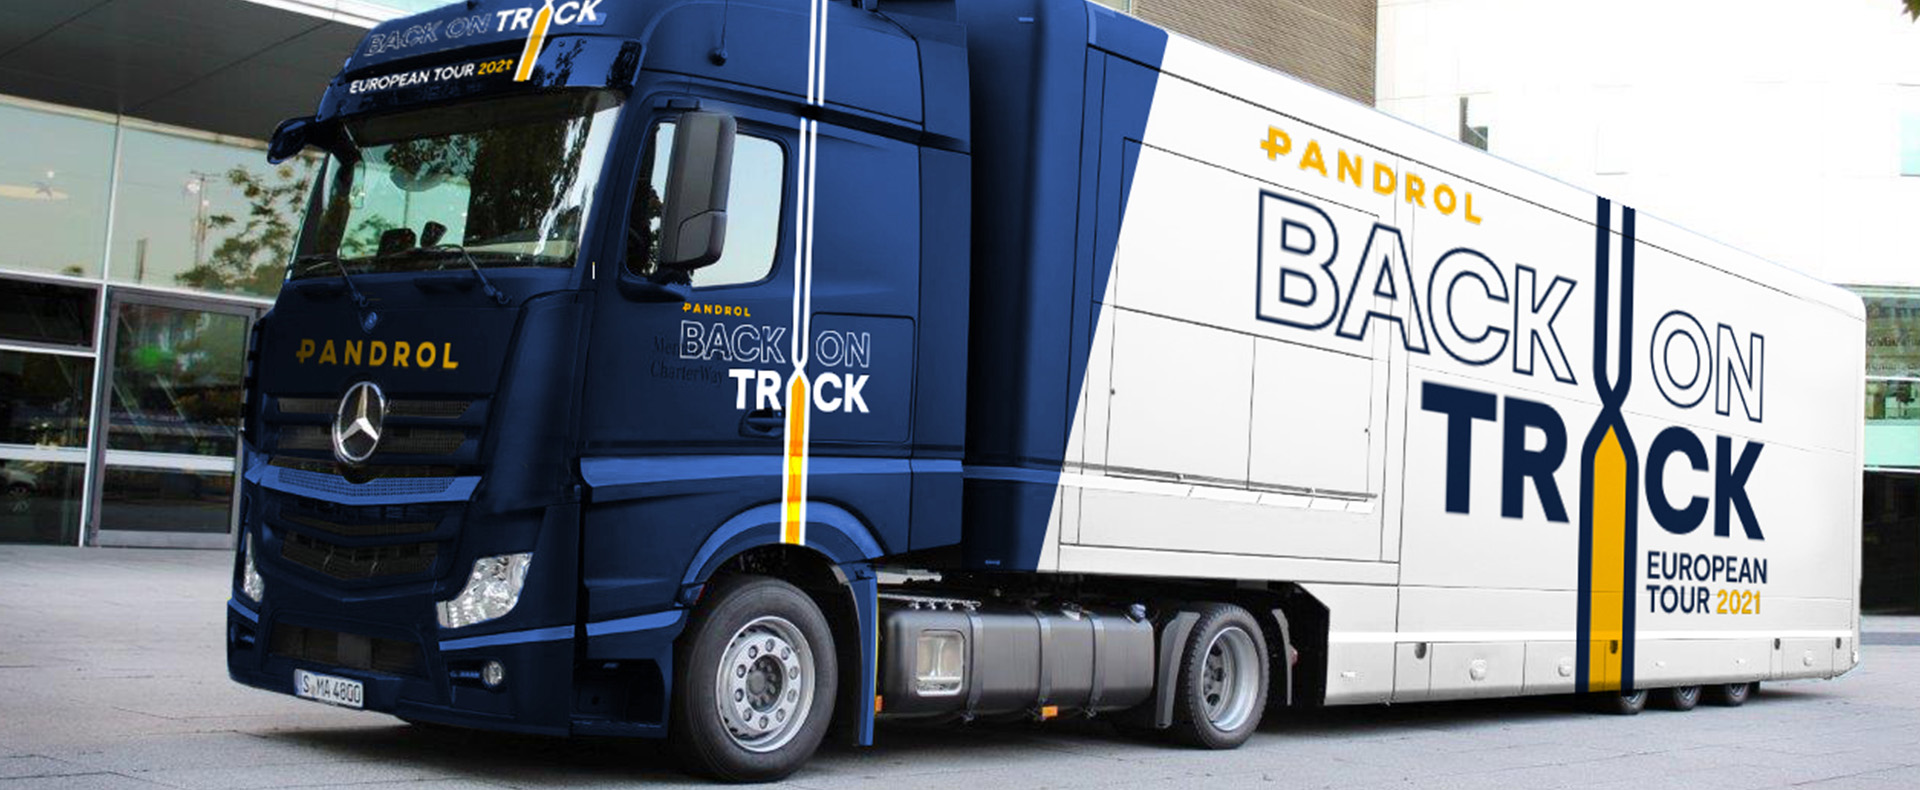 Pandrol Branded Lorry